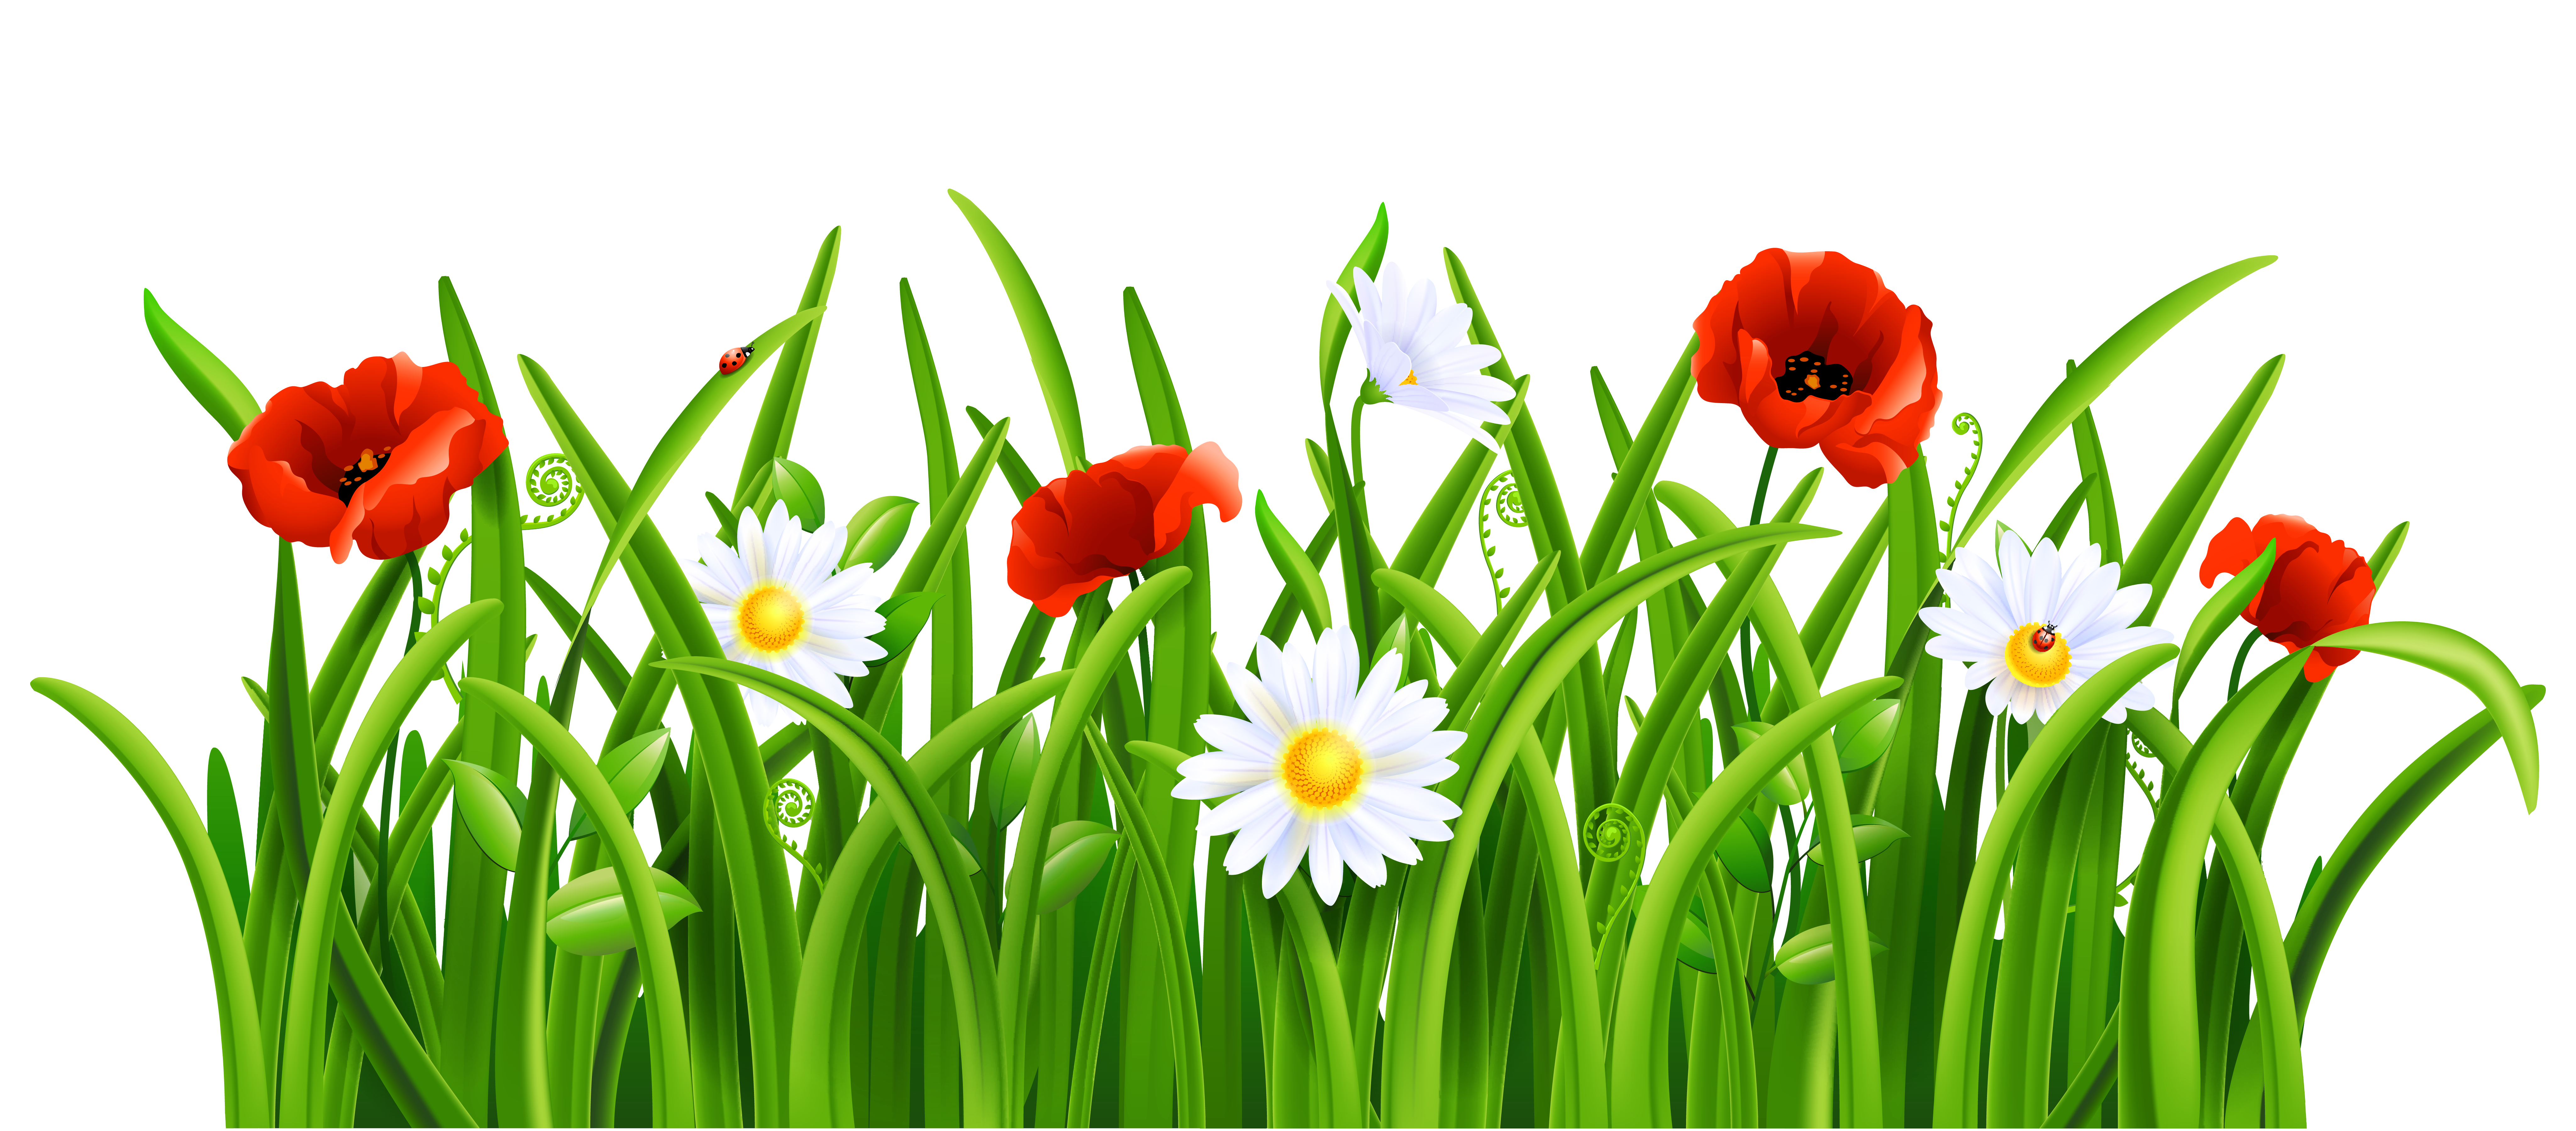 Poppies and Daisies with Grass PNG Clipart Picture | Gallery